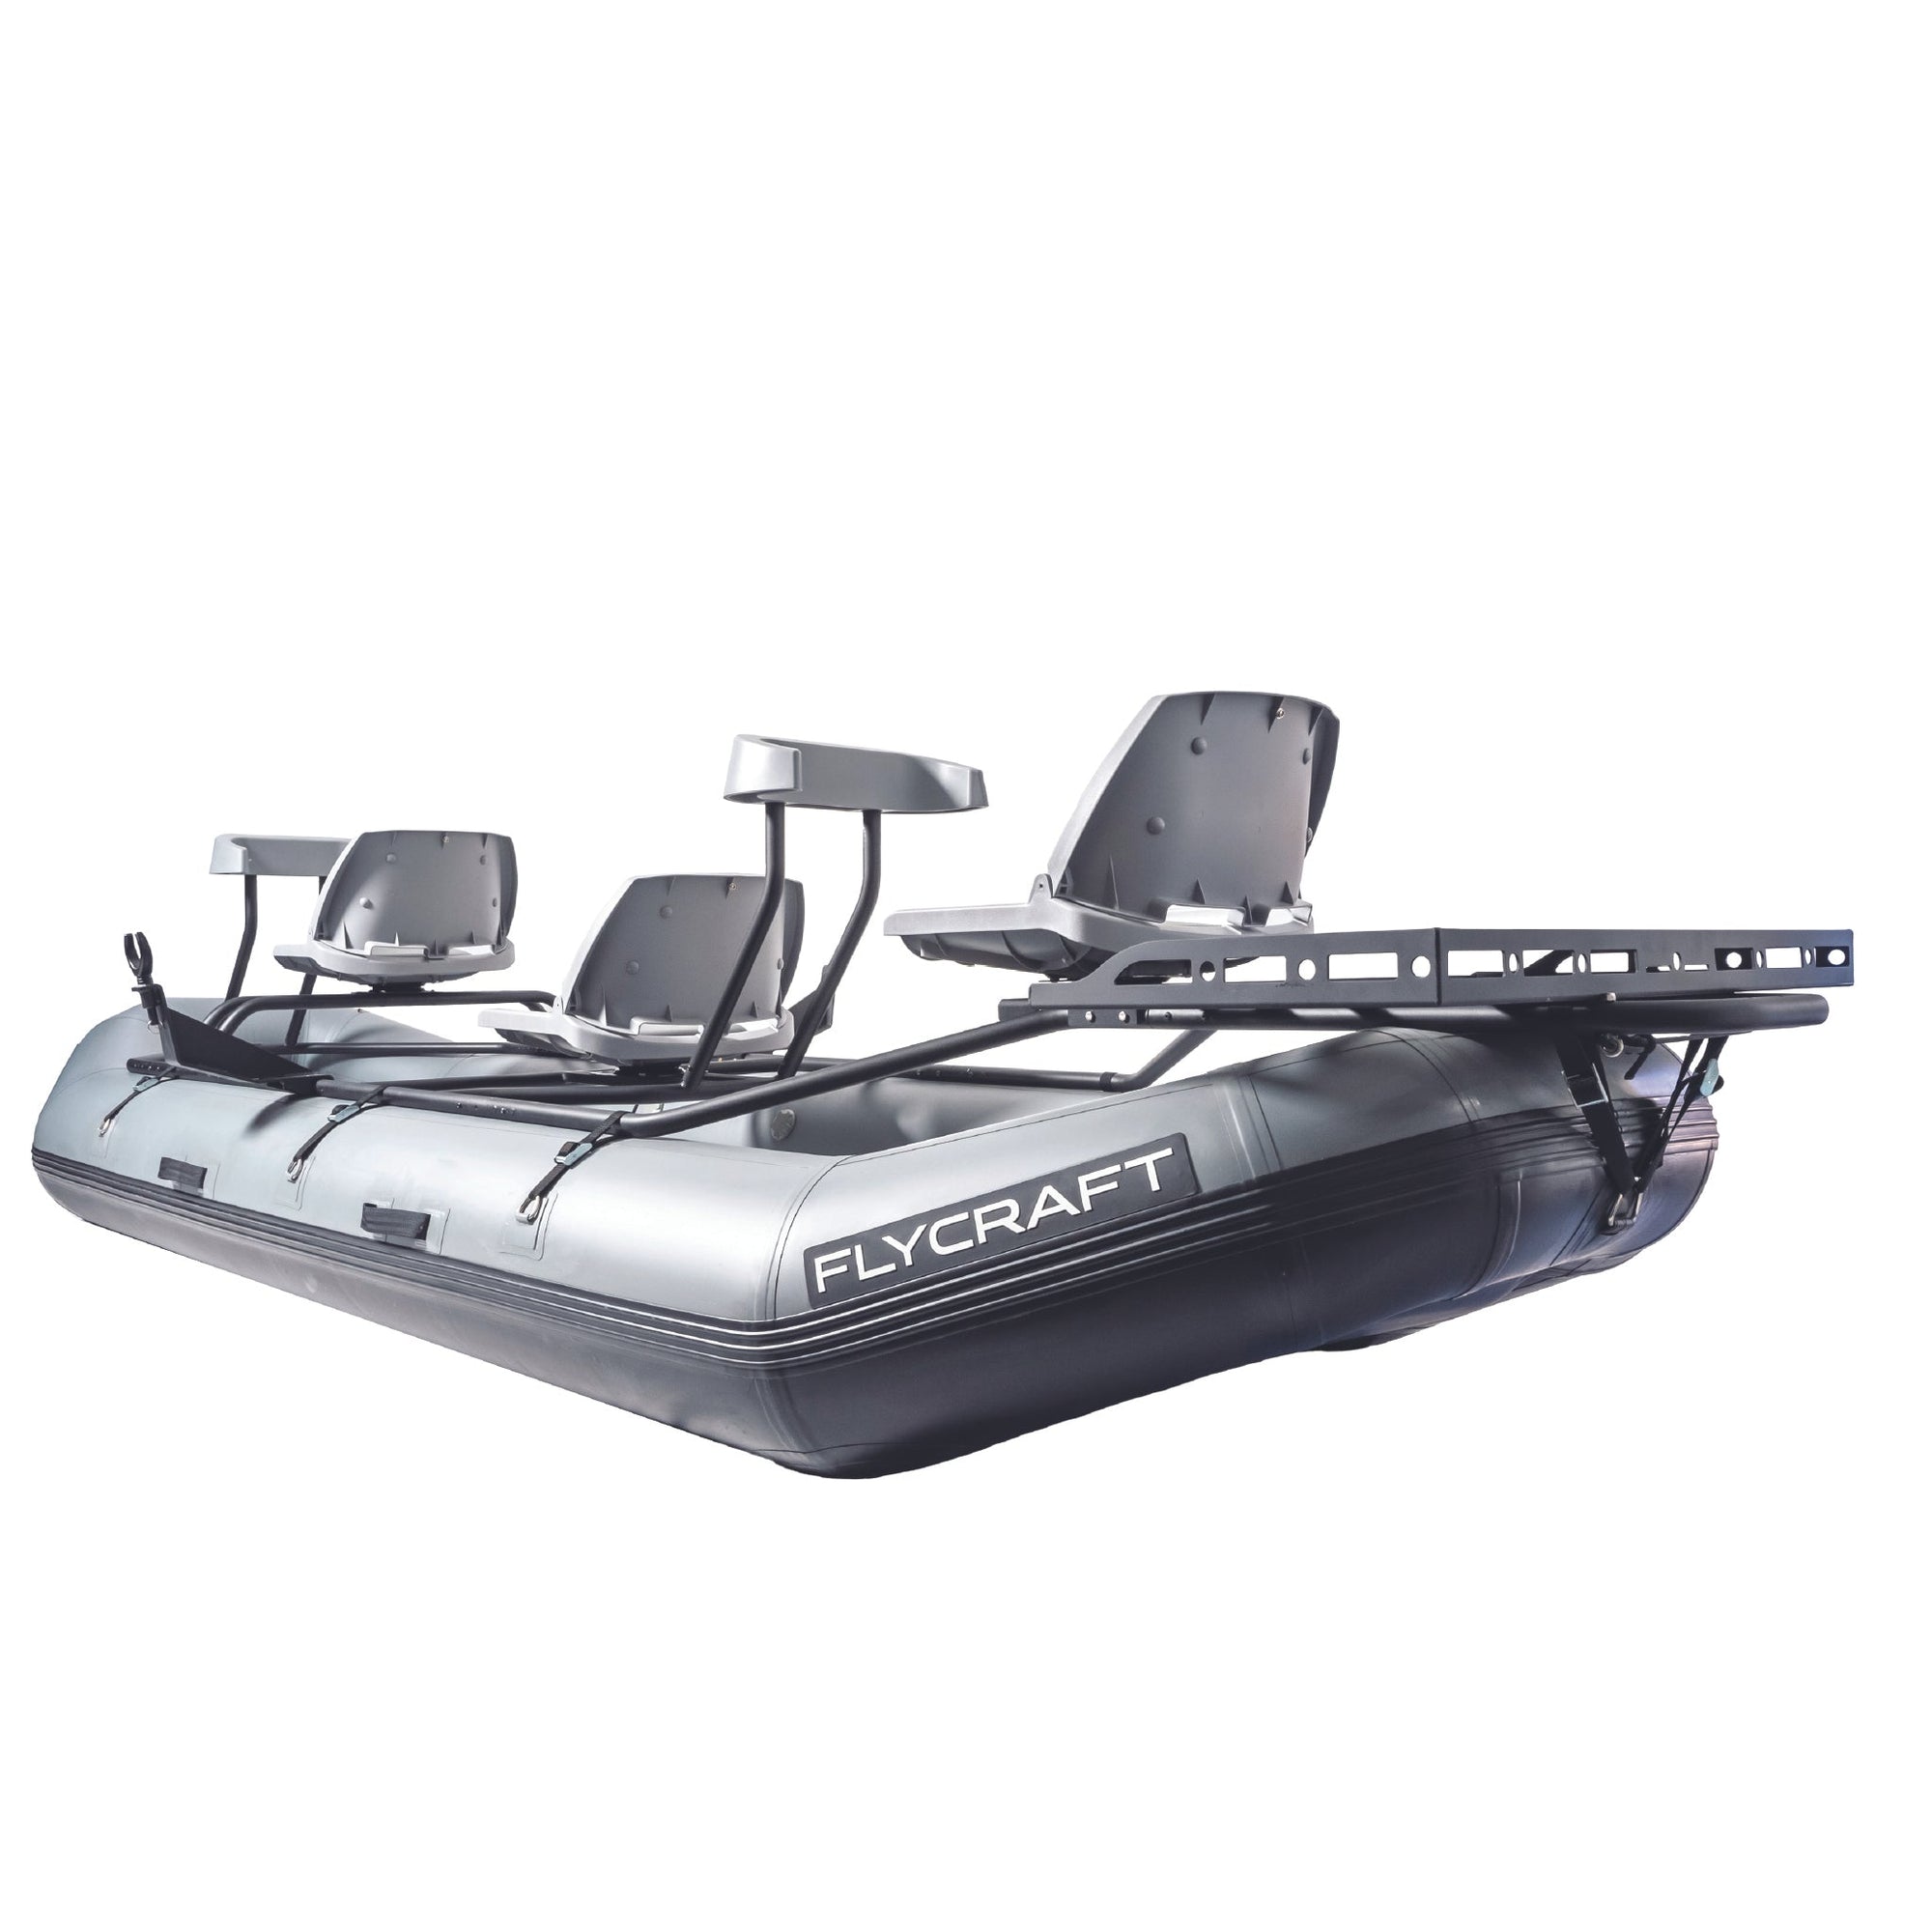 Flycraft’s Inflatable Fishing Boat: Guide Fish Package (3-Man)